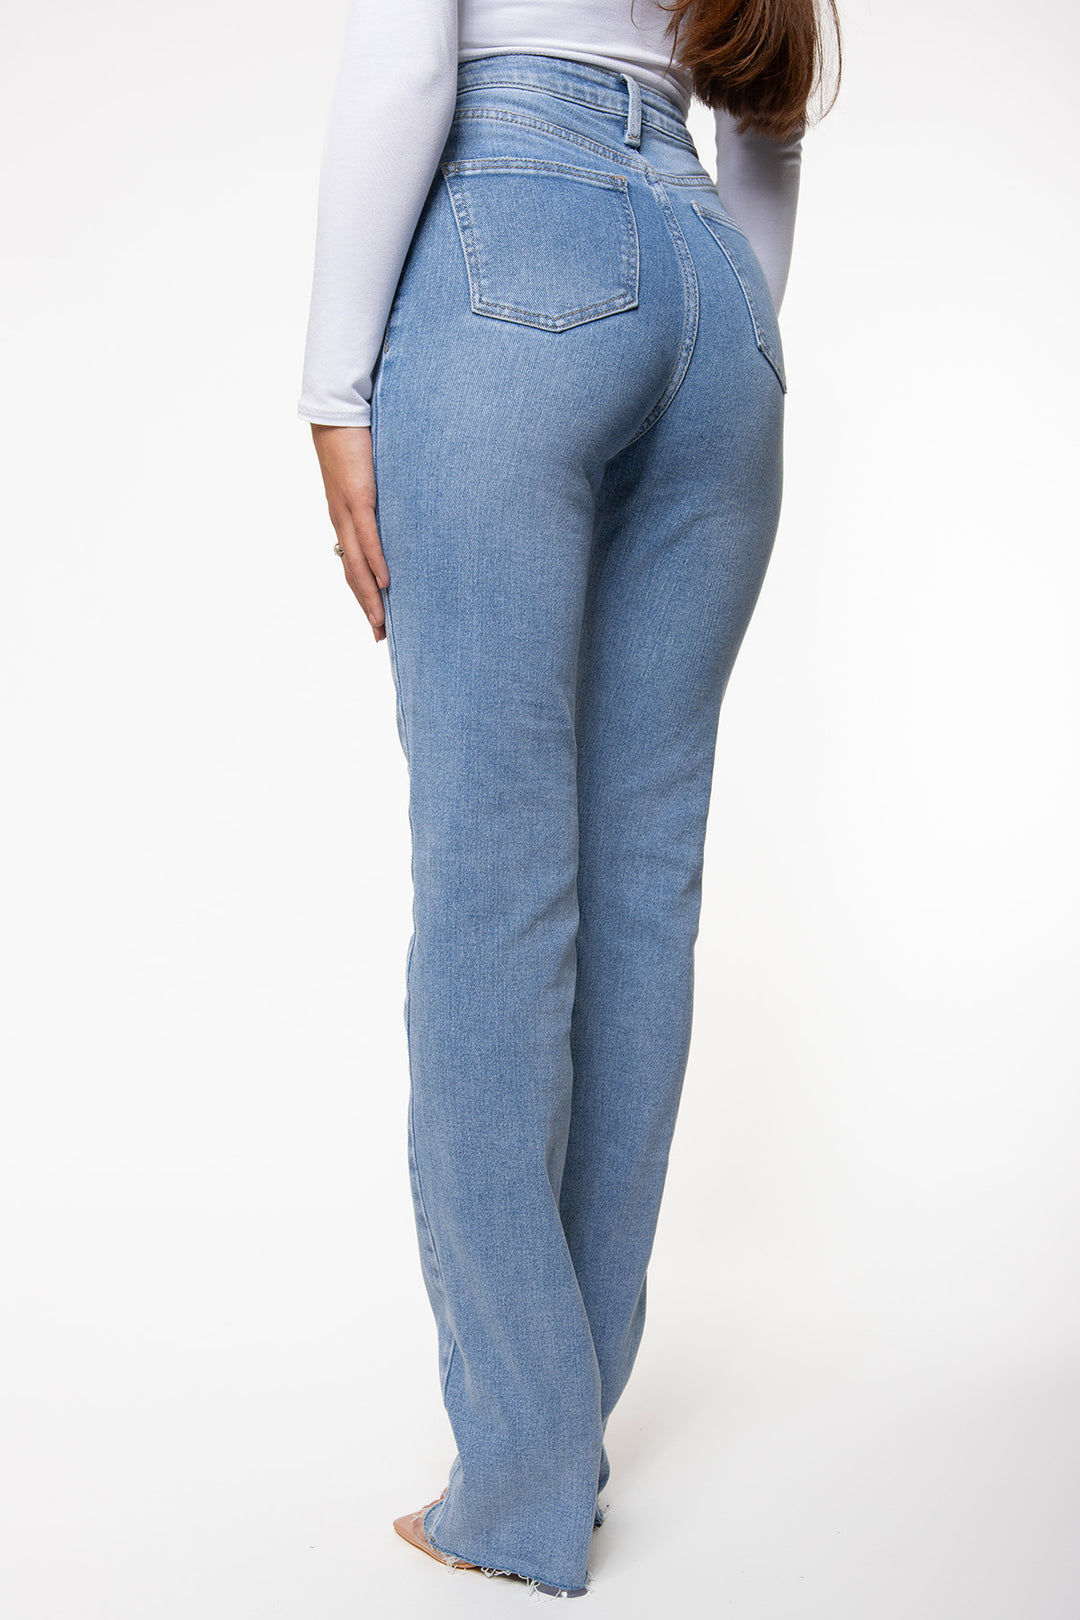 Quency Stretch Straight Leg Jeans - EXTRA TALL Jeans Routines Fashion   